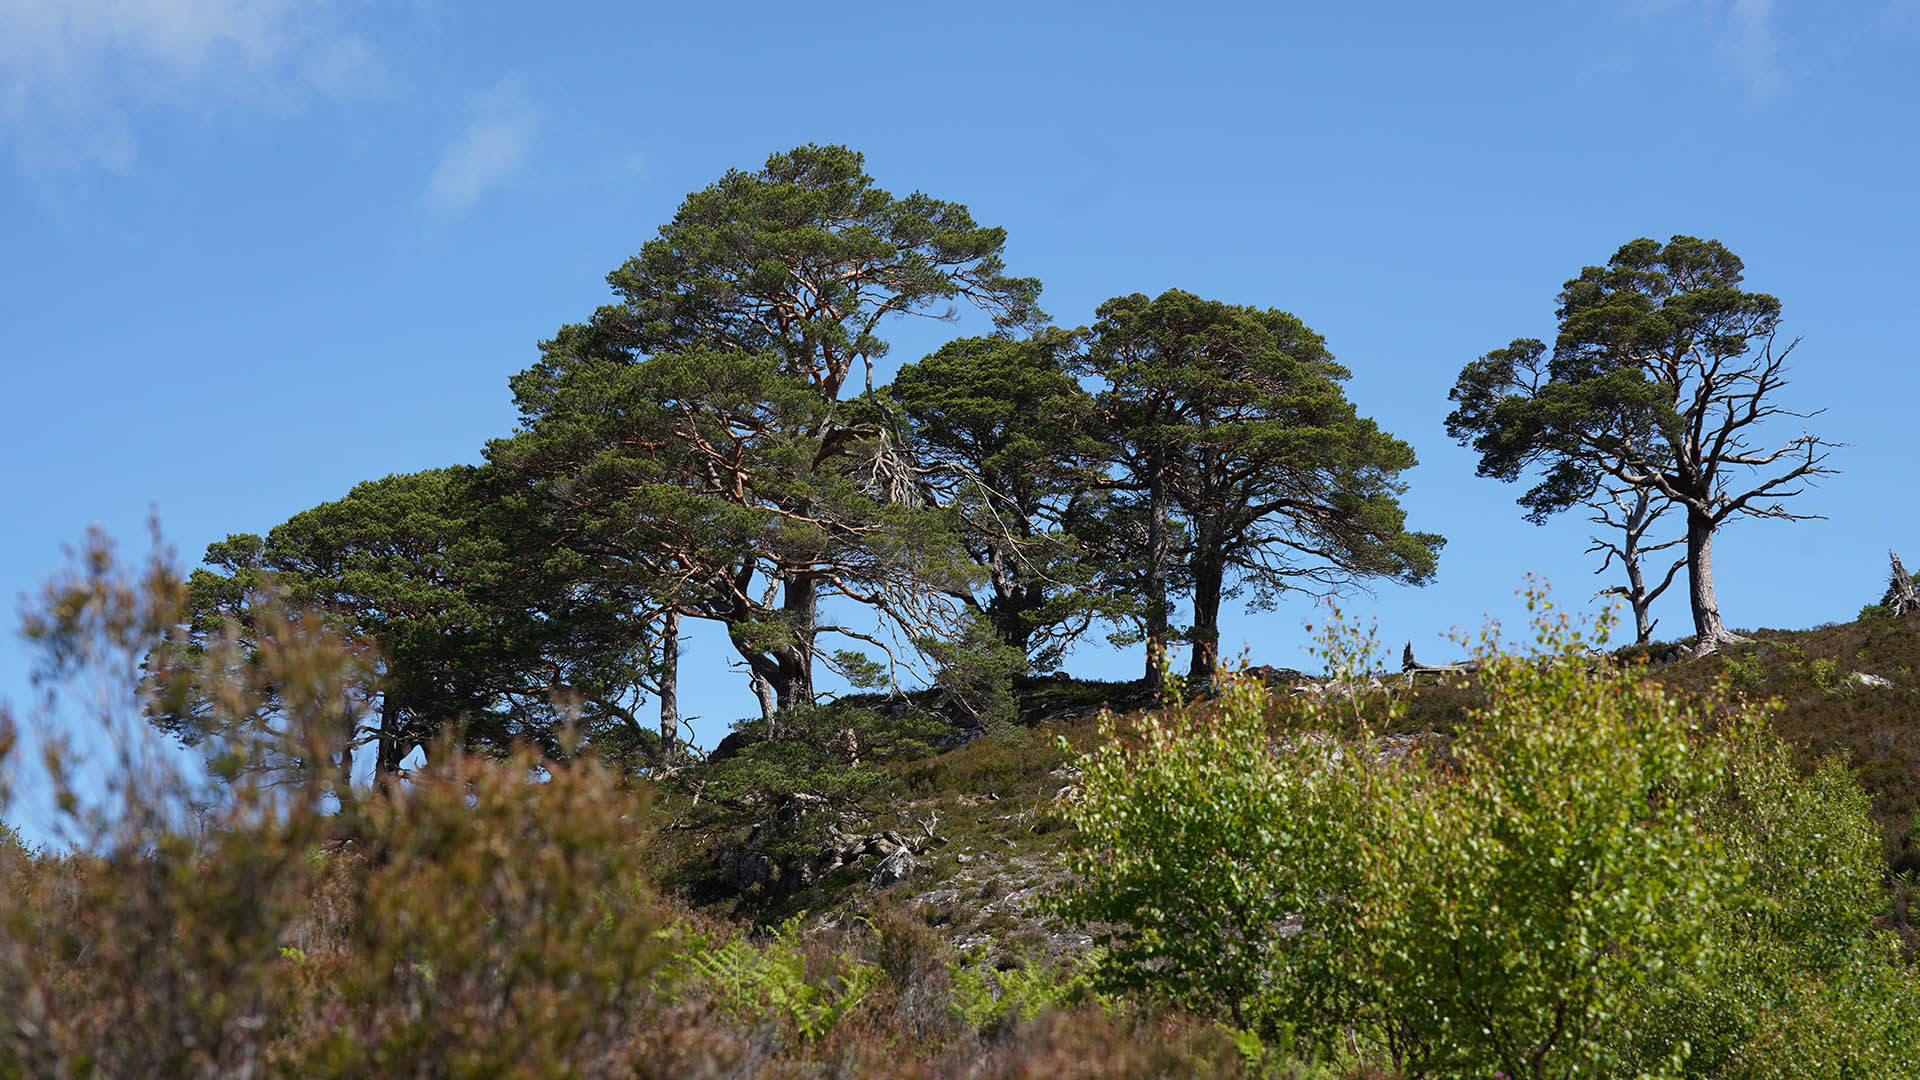 The Scots Pine – Tree of the year 2007